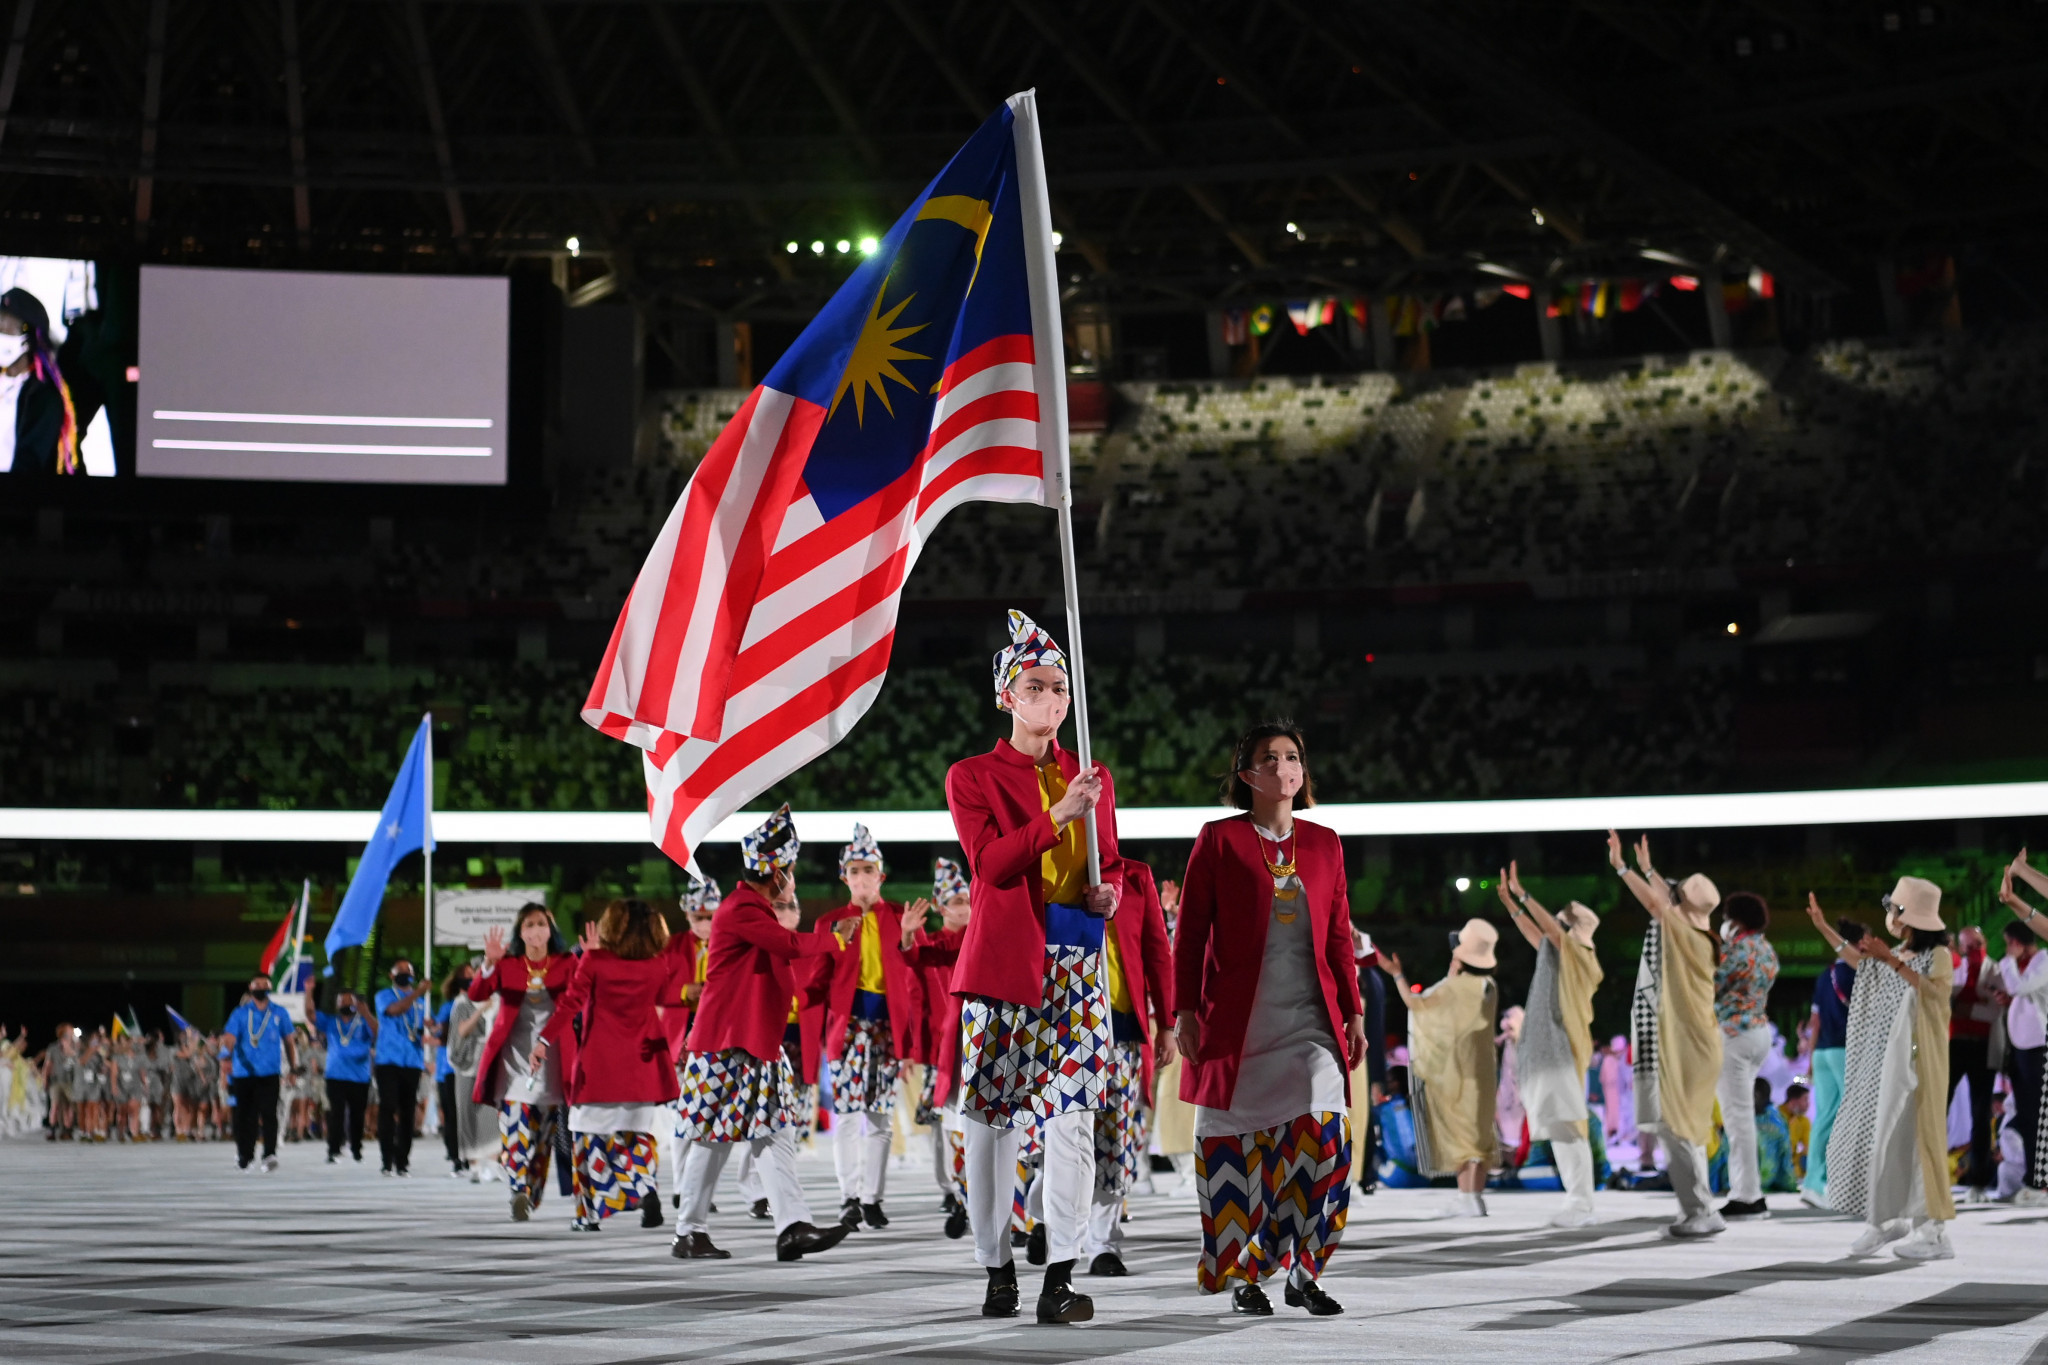 Malaysia is aiming to secure its first-ever Olympic gold medal at Paris 2024 ©Getty Images